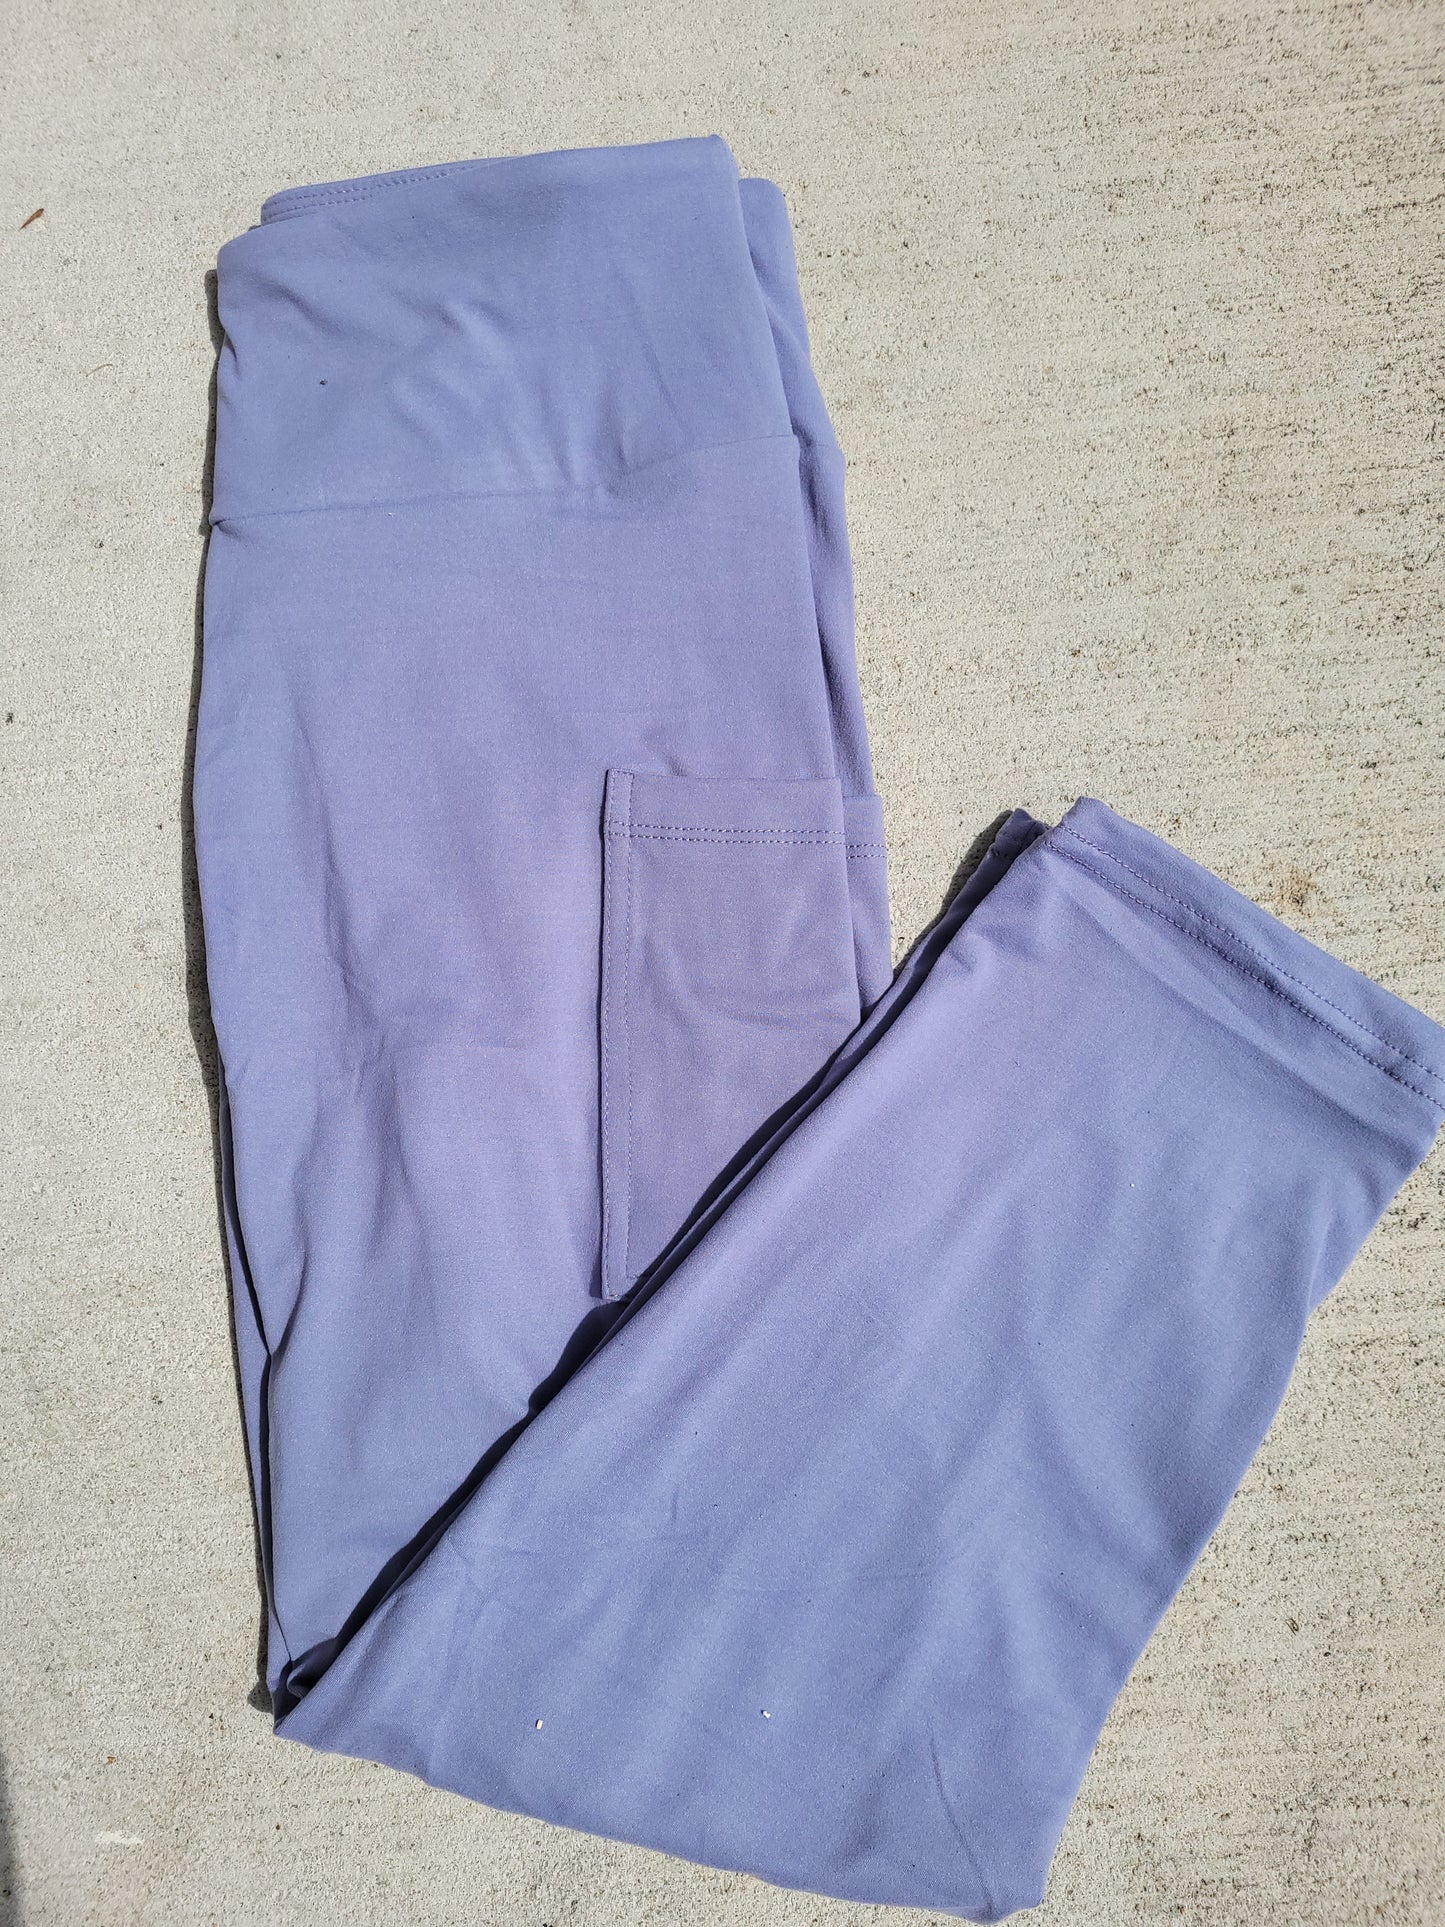 Lavendar capris and shorts with pockets now instock!